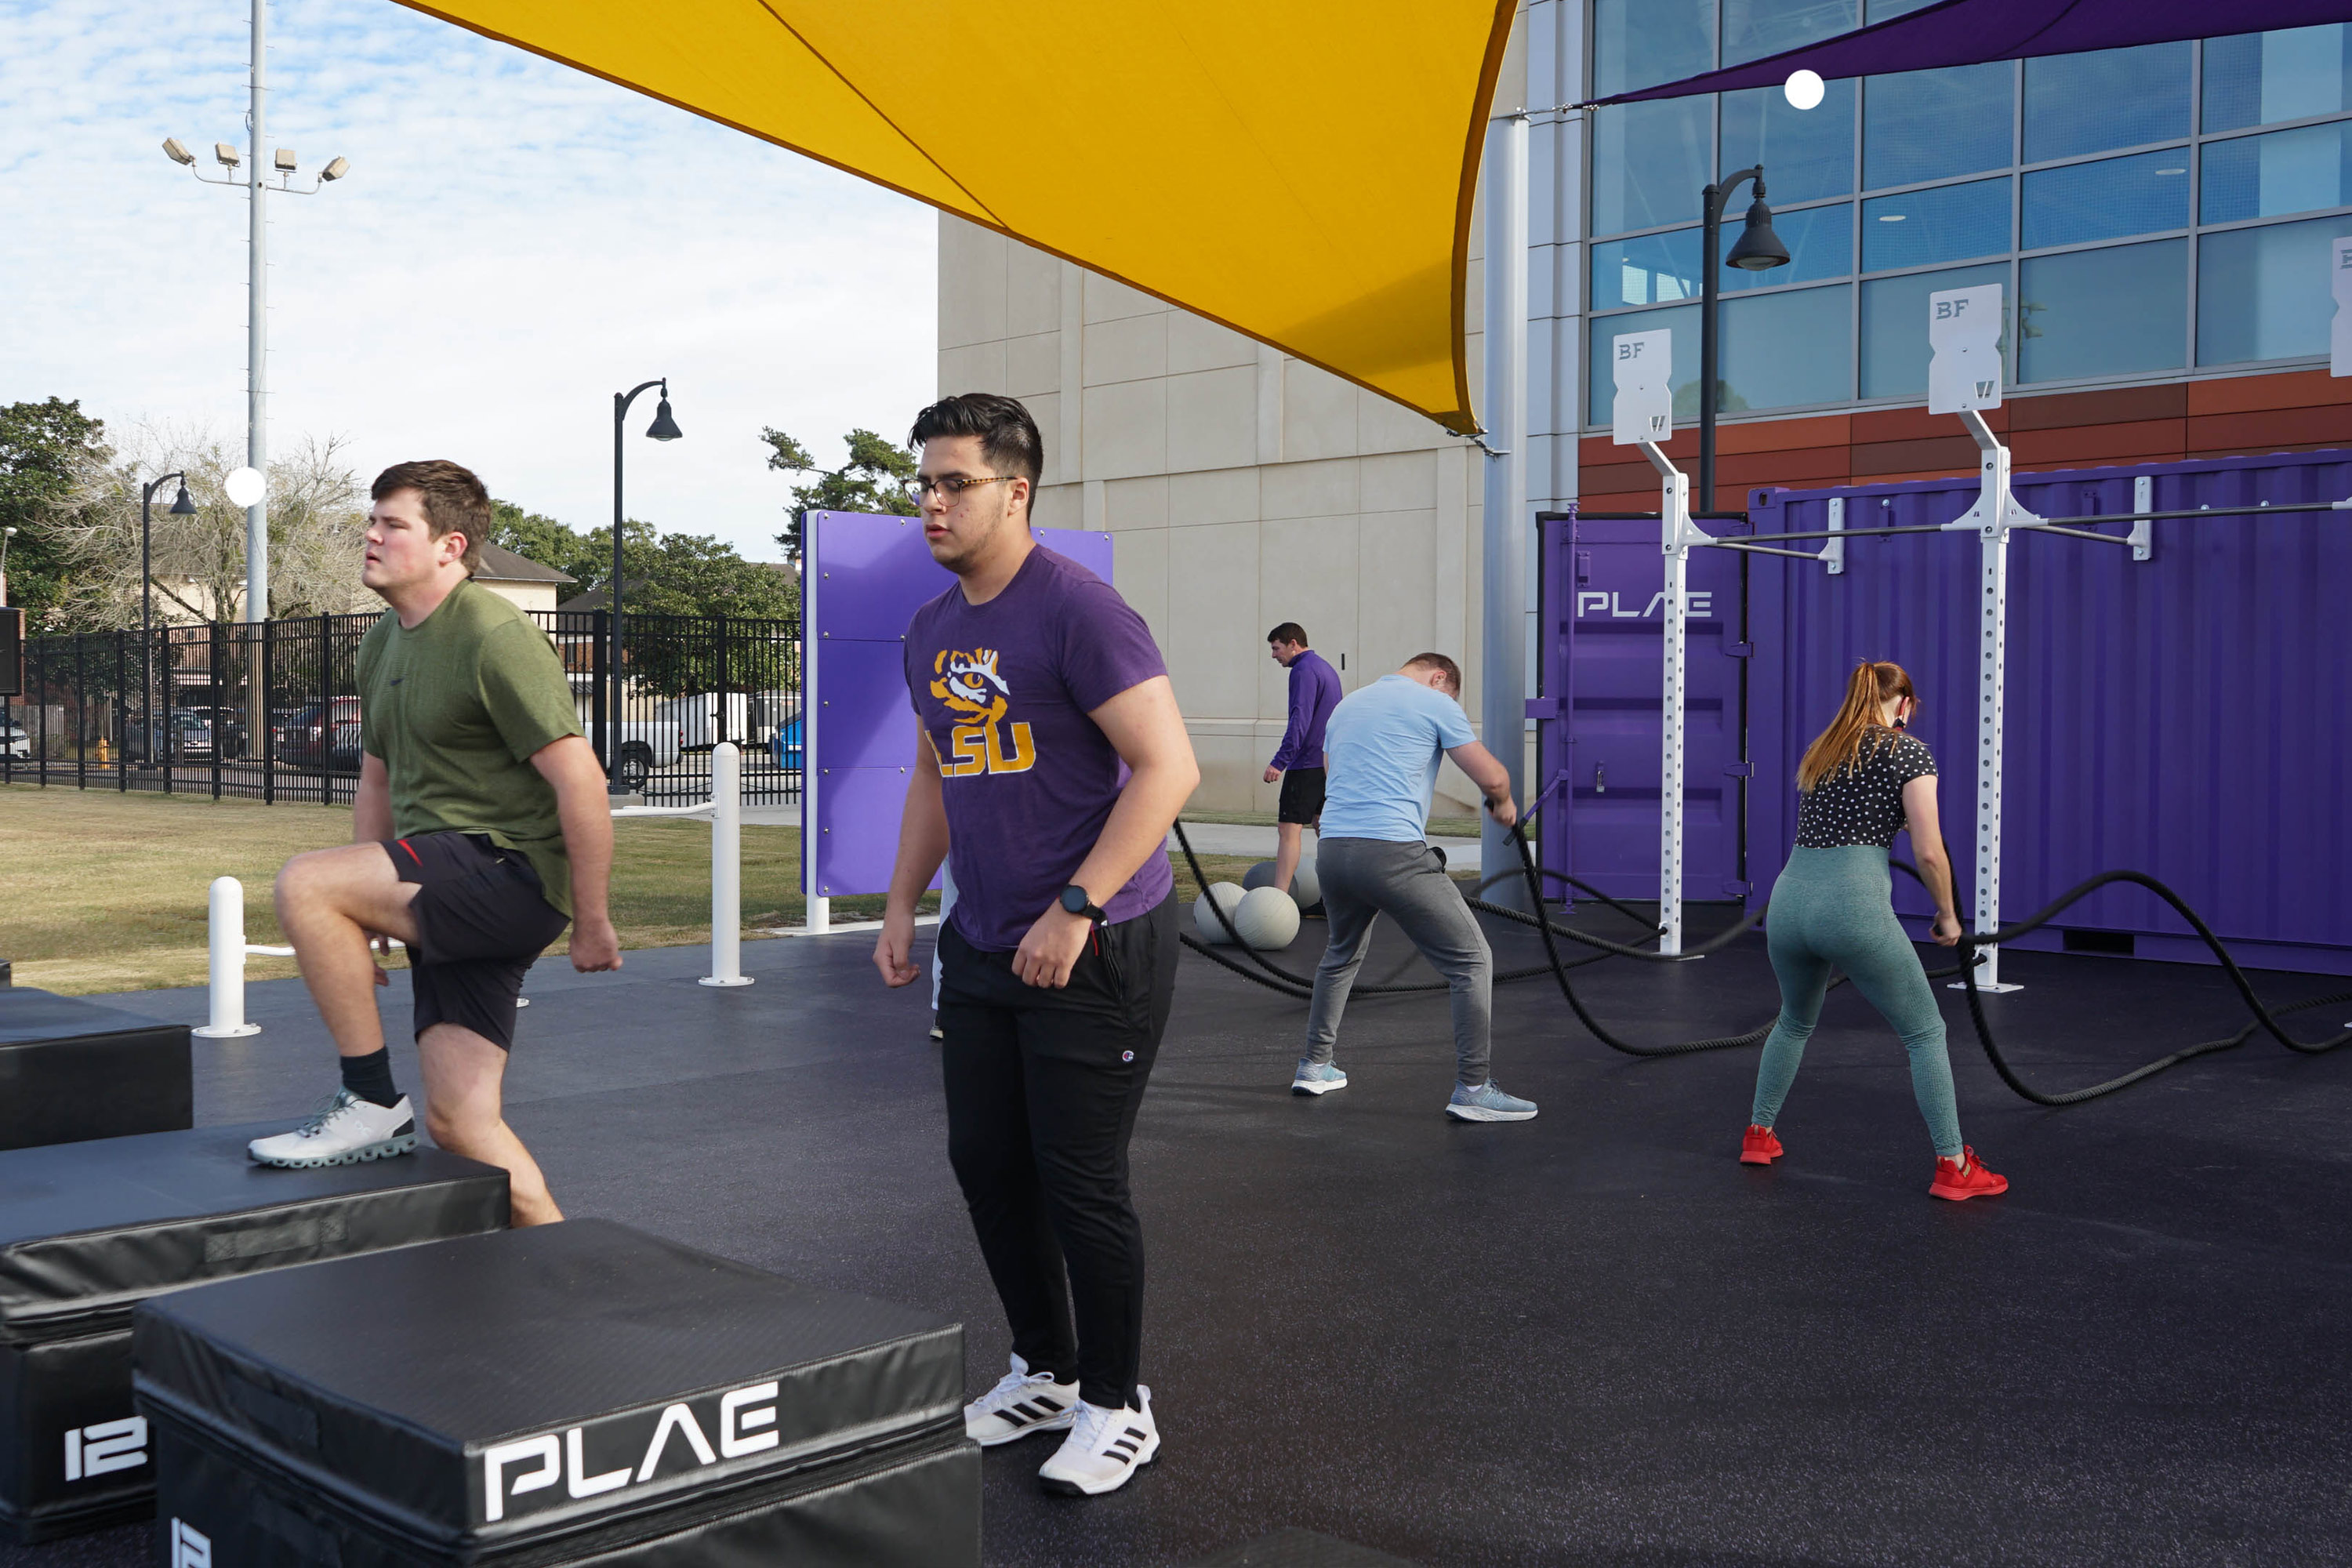 patrons getting a workout in in our outdoor fitness area